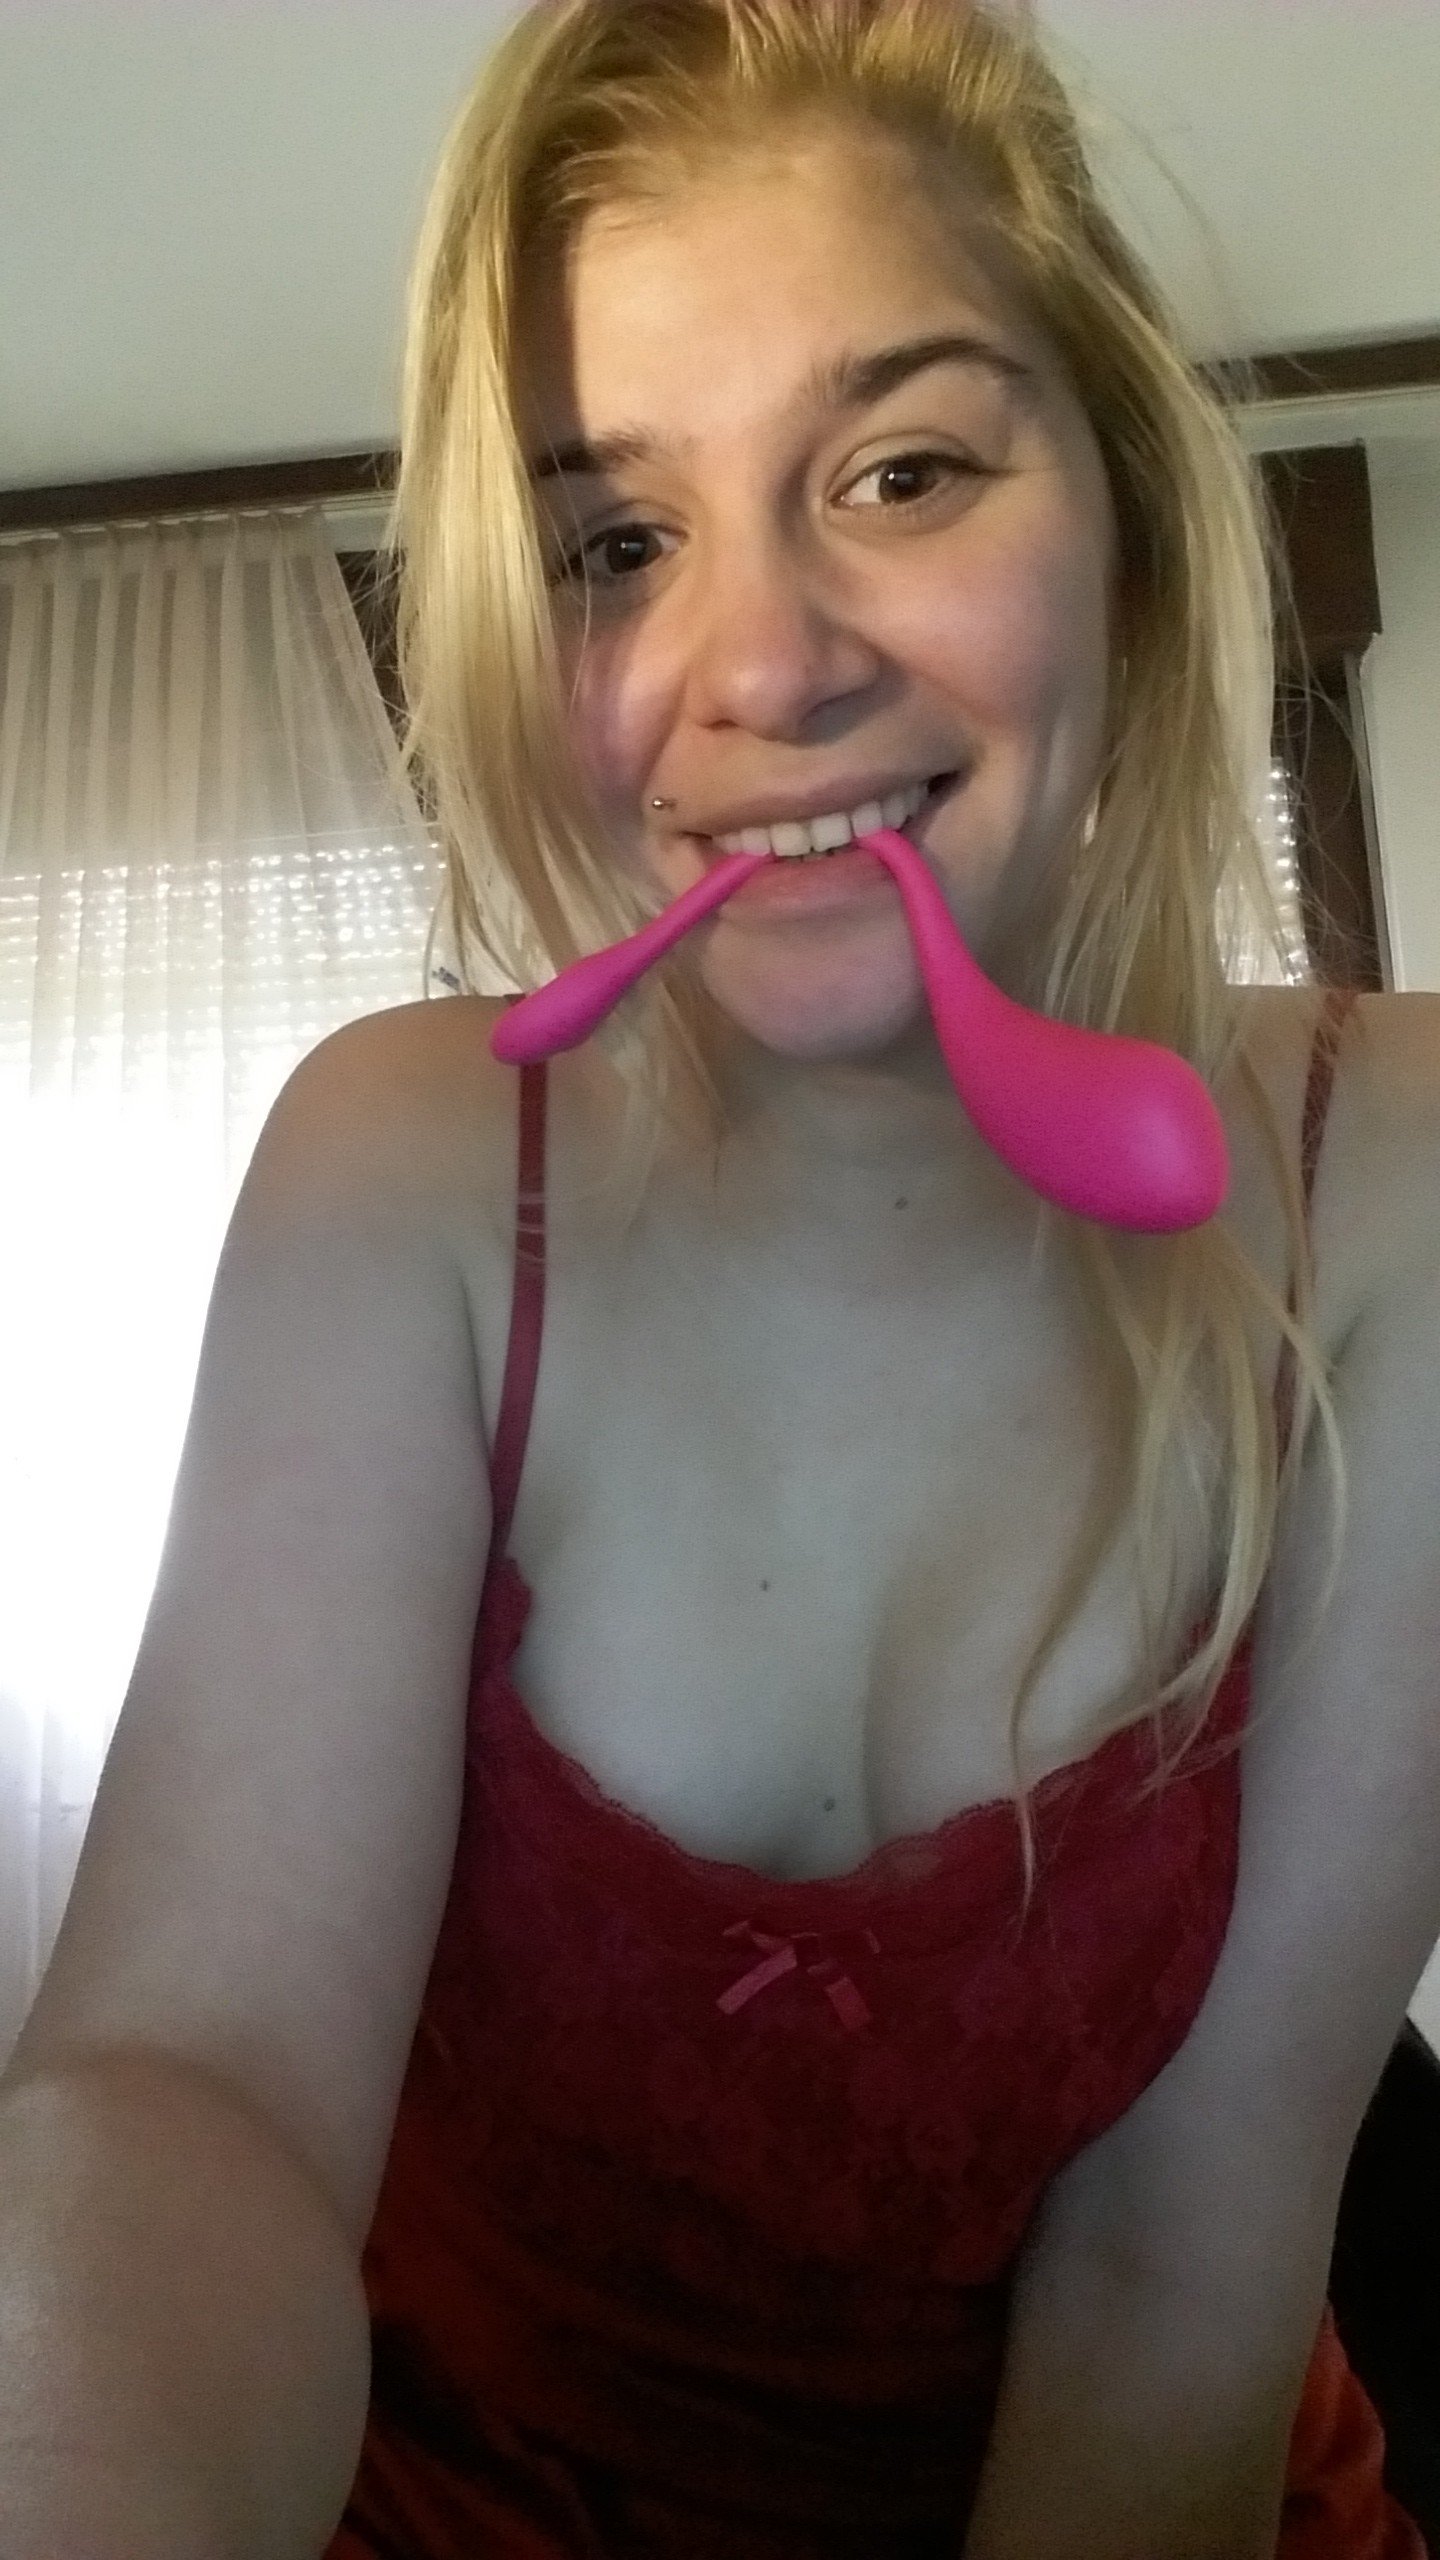 Photo by Mia with the username @nocages, who is a star user, posted on December 17, 2020. The post is about the topic Adorable and the text says 'I would say I am adorable, but you?
Waiting you to play with me.. https://chaturbate.com/in/?track=default&tour=dT8X&campaign=8QxWf&room=miadanes369'